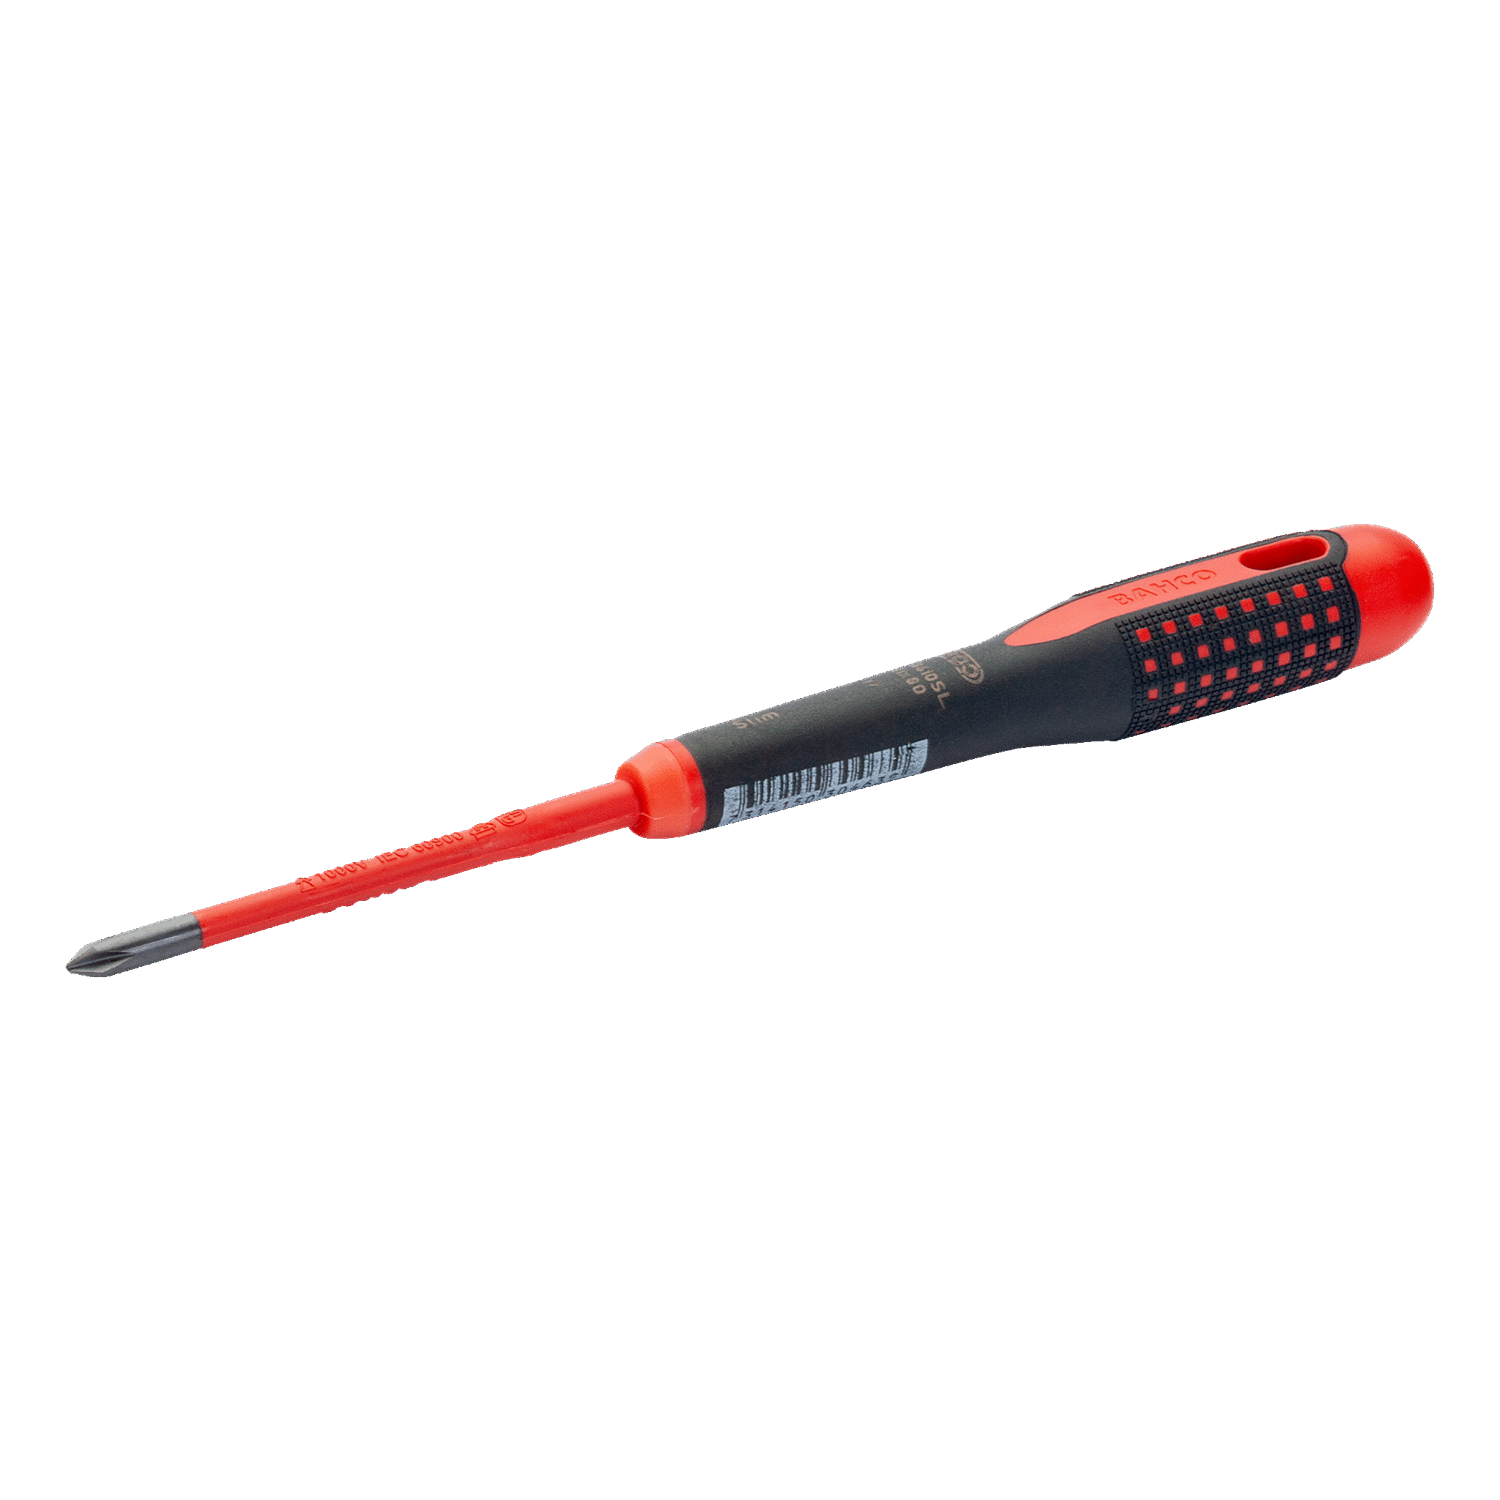 BAHCO BE-8610SL - BE-8620SL ERGO Slim VDE Phillips Screwdriver - Premium Phillips Screwdriver from BAHCO - Shop now at Yew Aik.